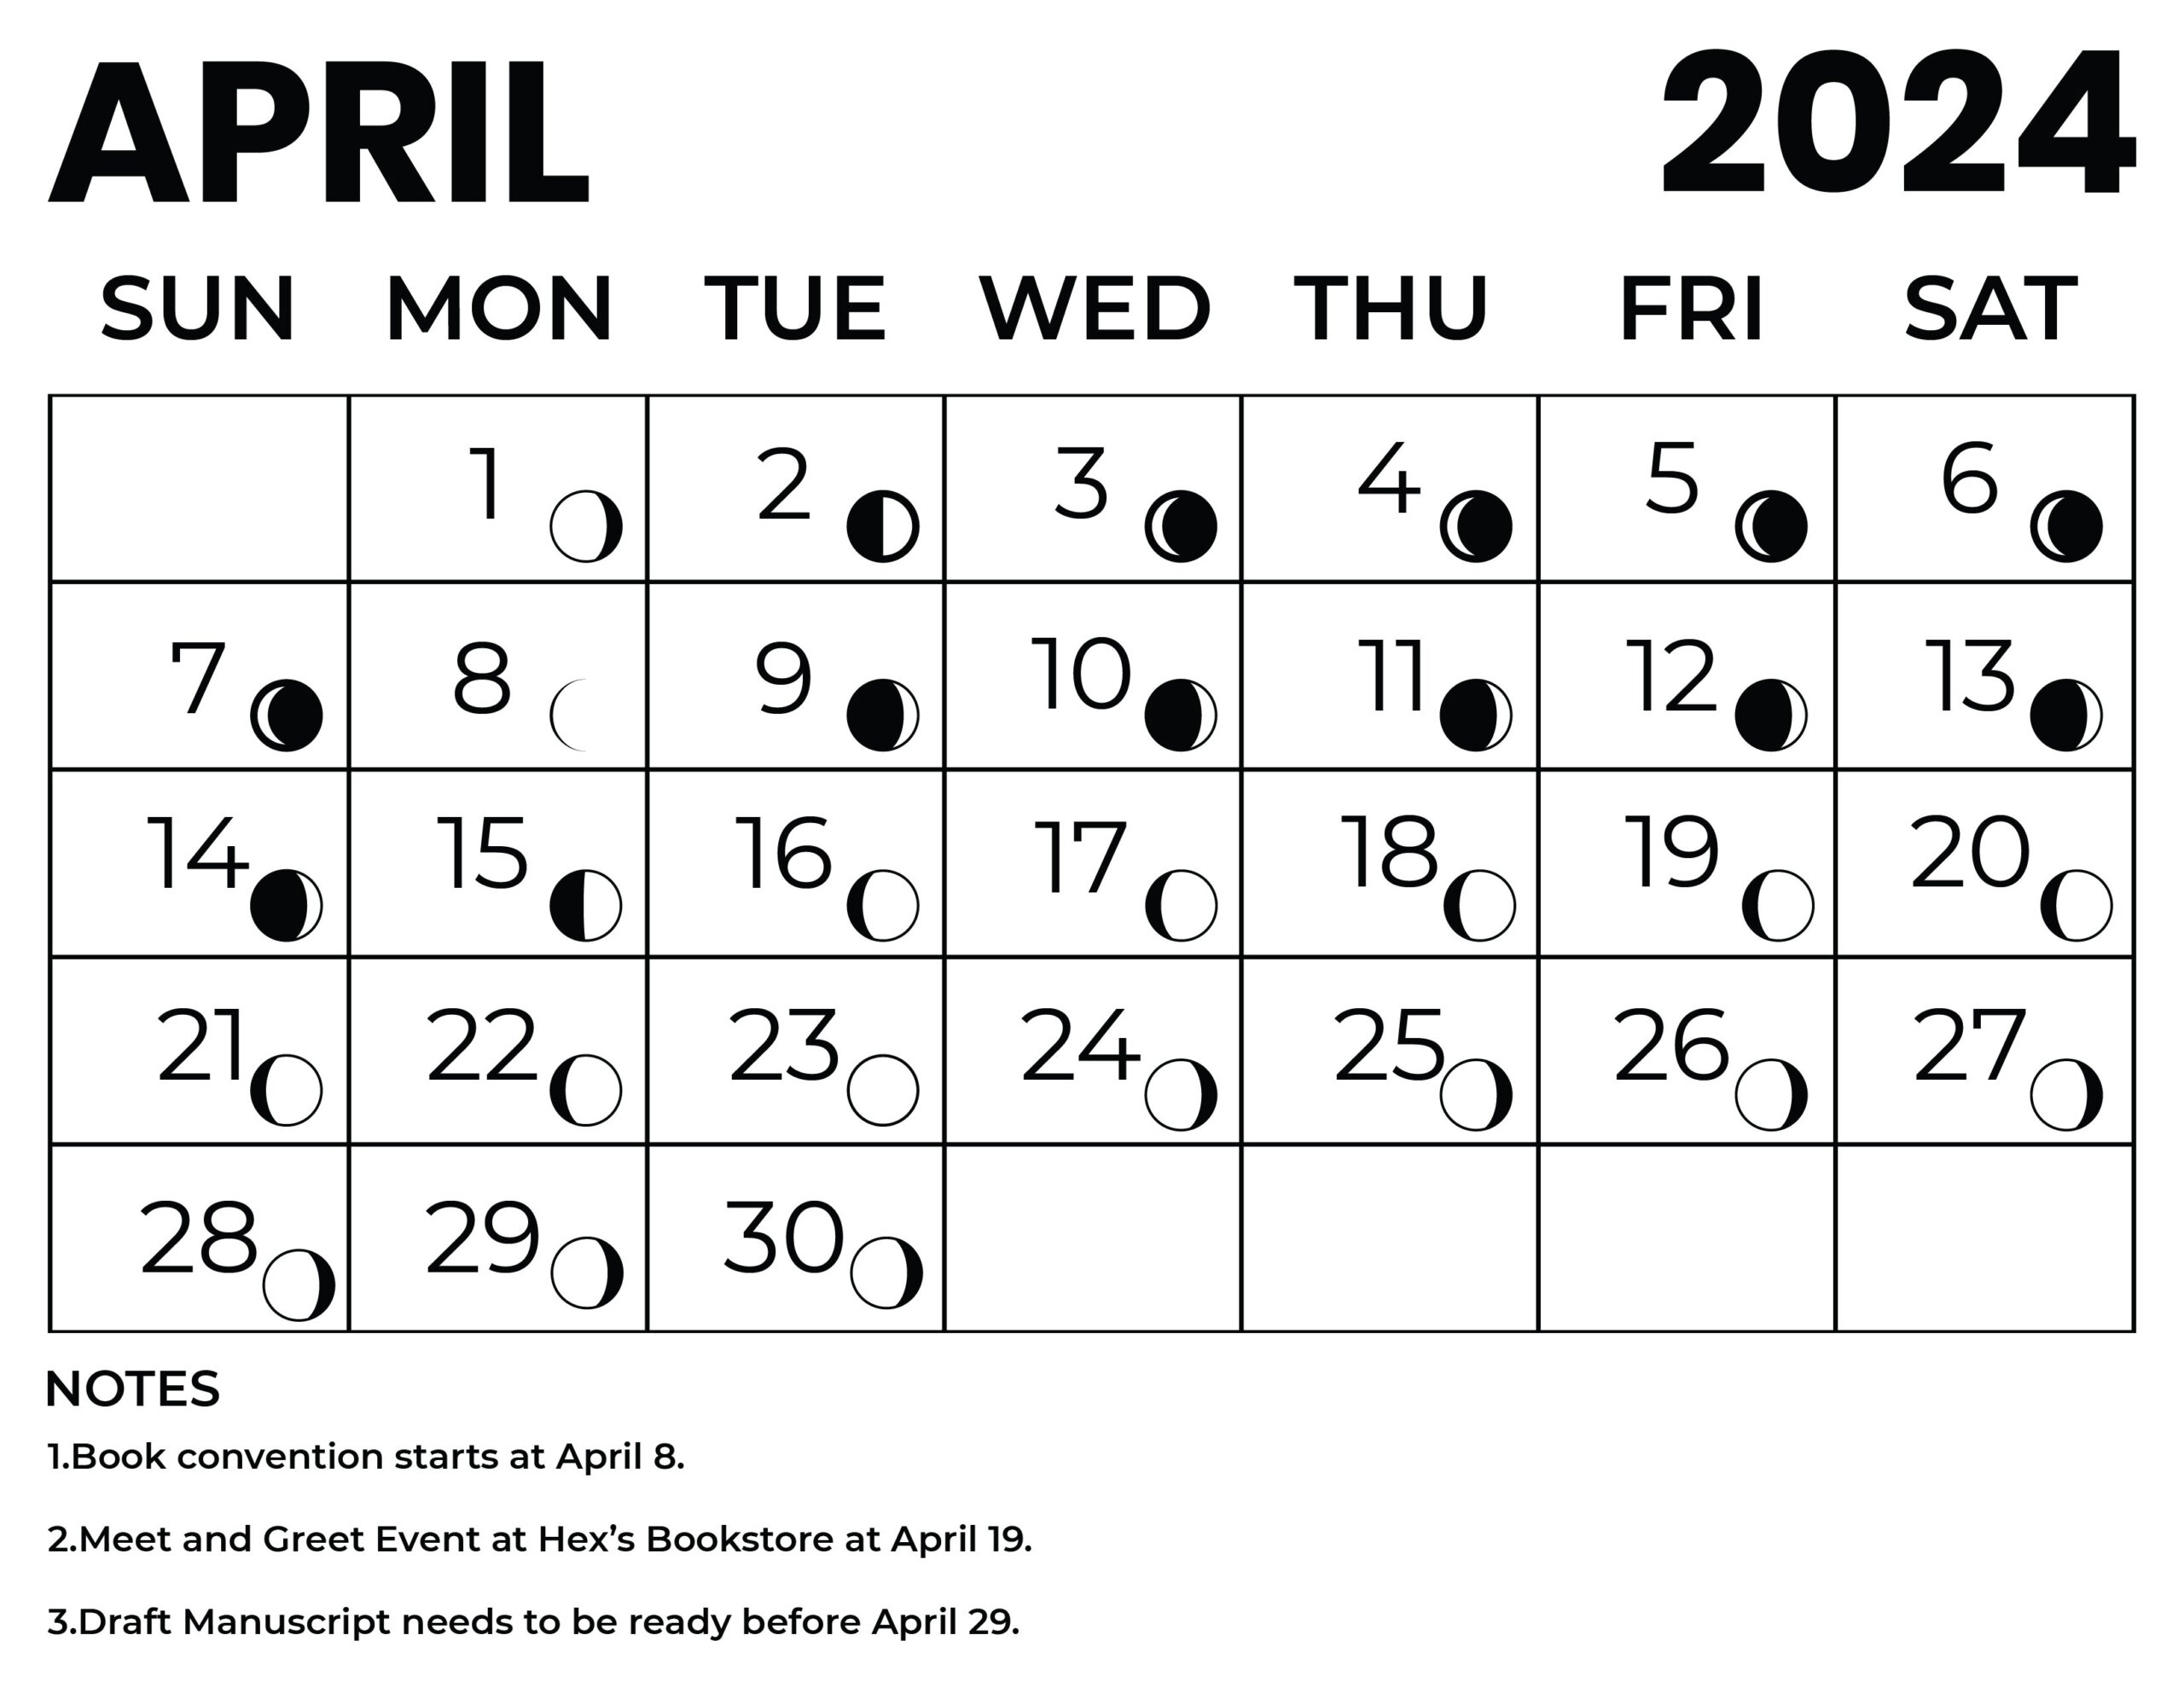 April 2024 Calendar With Moon Phases - Word, Illustrator, Eps, Svg for Printable Calendar 2024 With Moon Phases